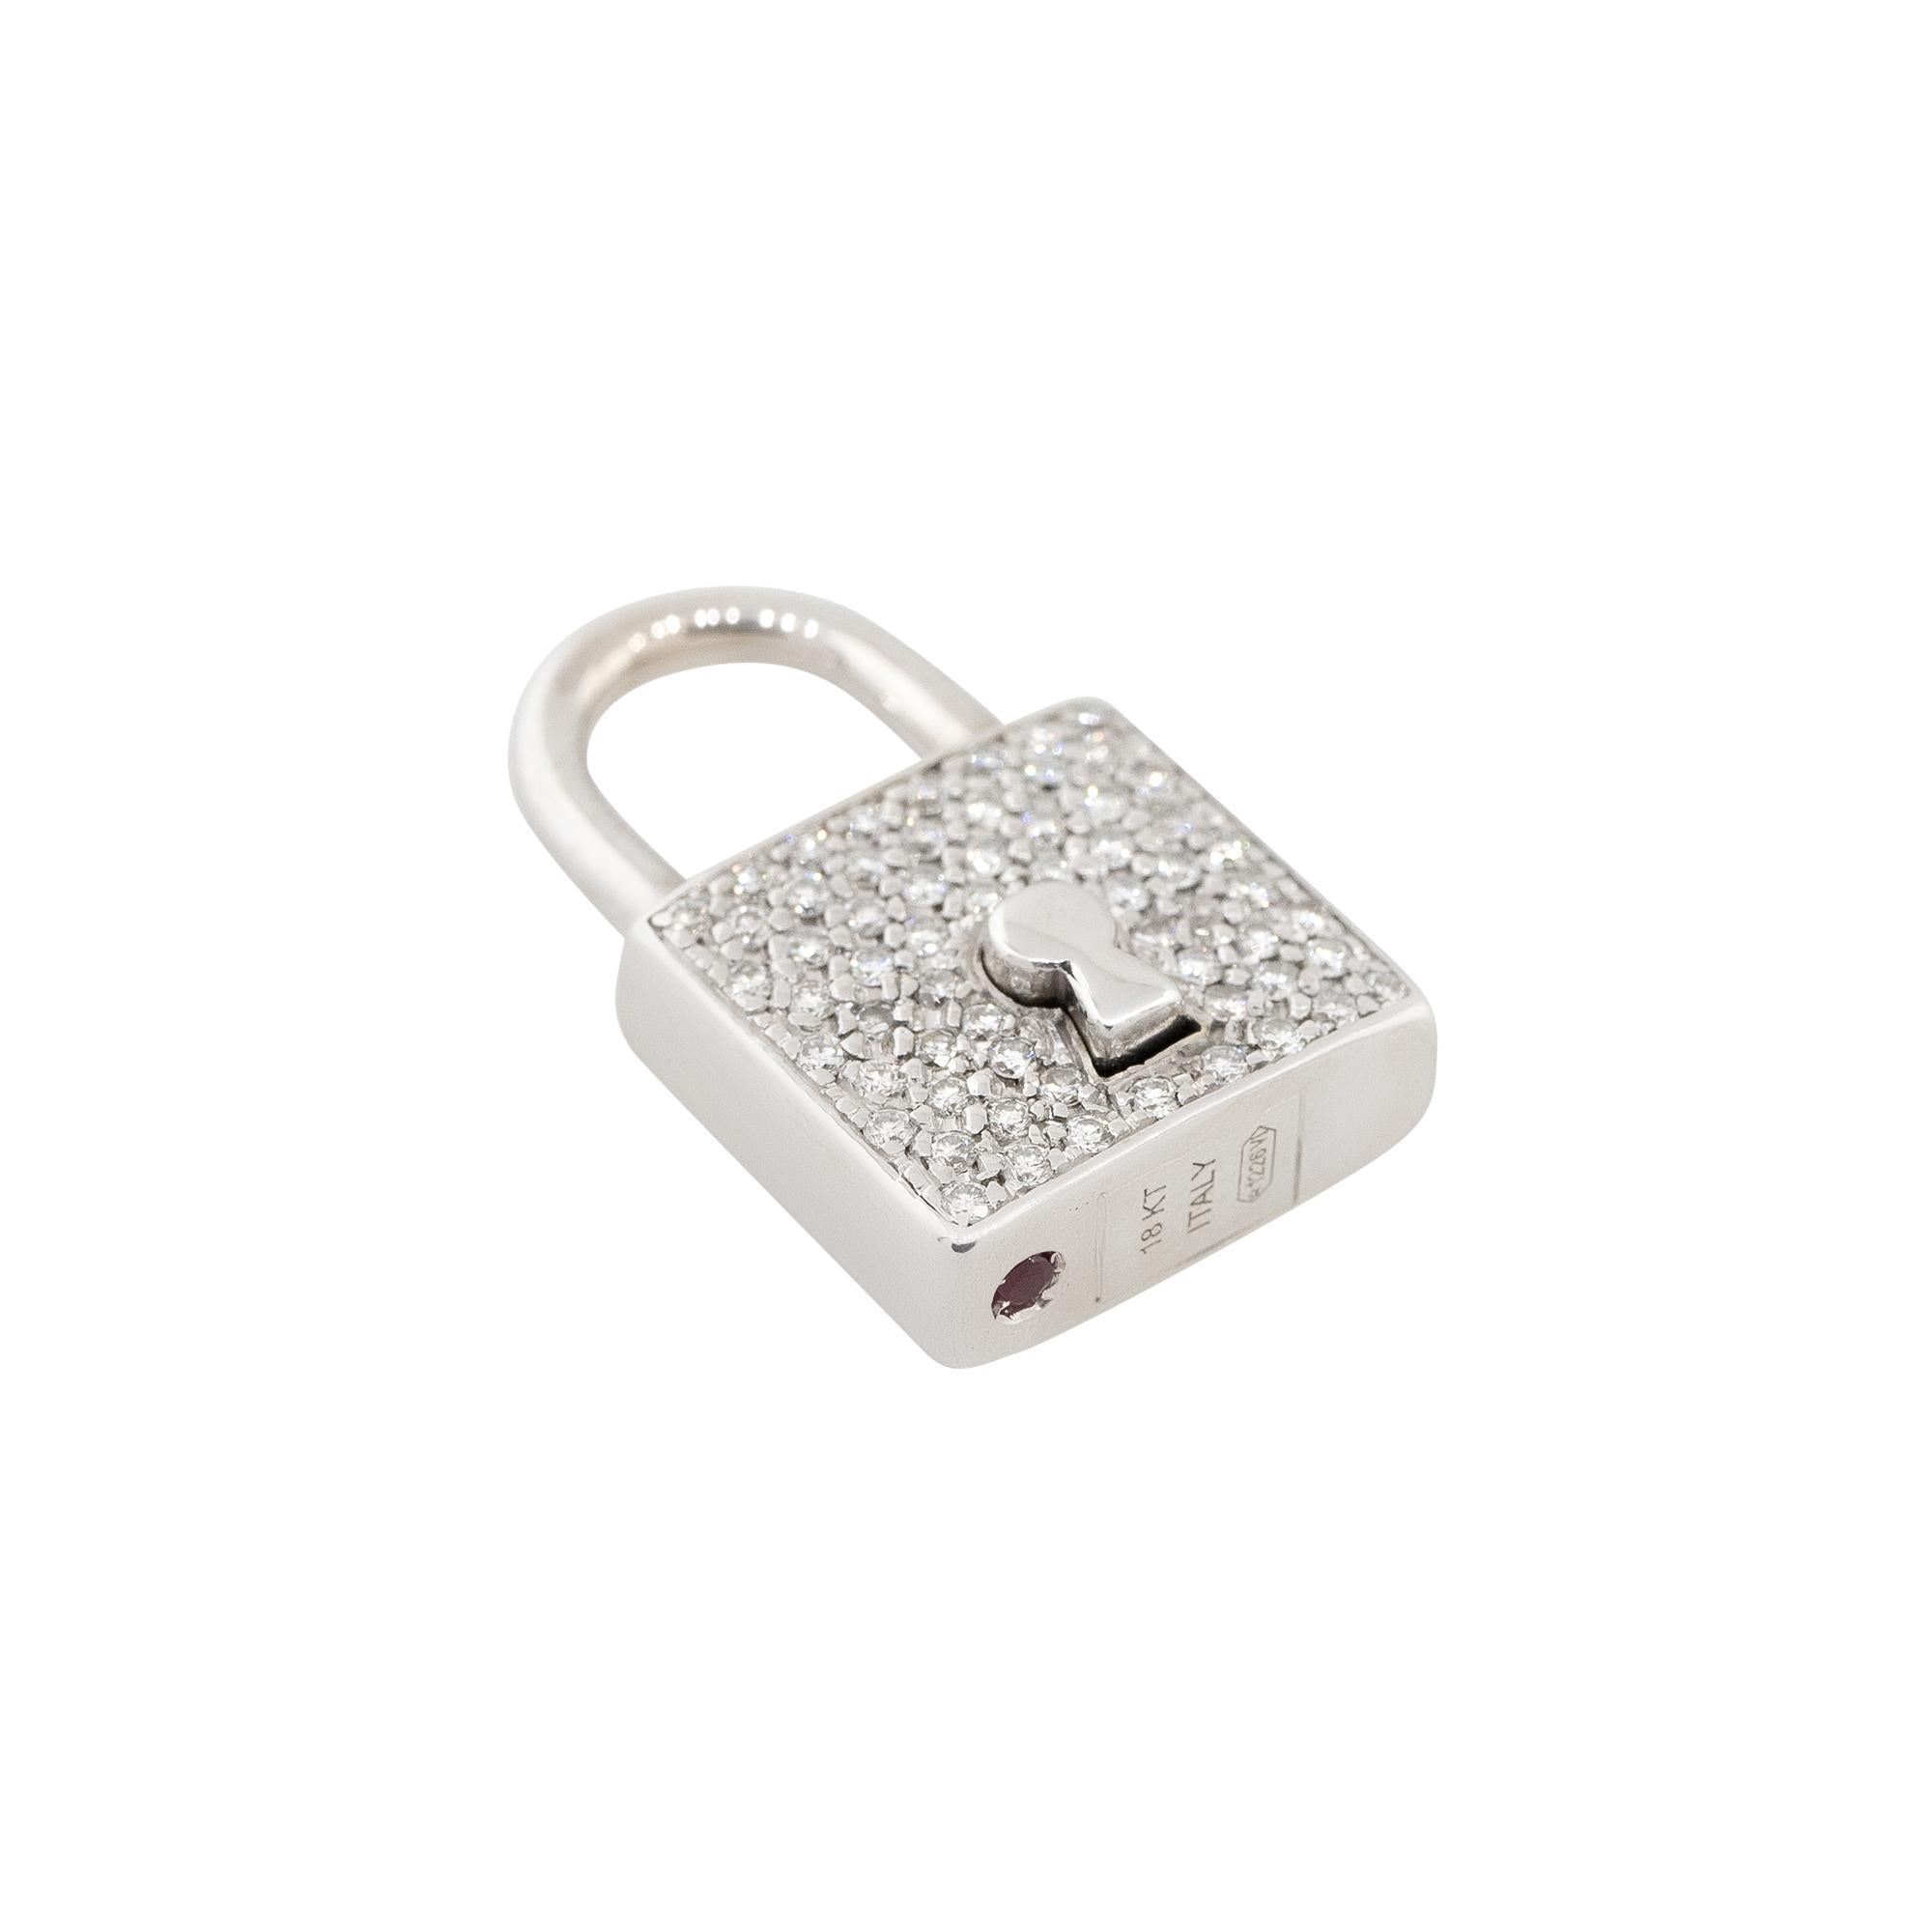 Roberto Coin 18k White Gold 0.43ctw Women's Diamond Padlock Pendant

Brand: Roberto Coin
Material: 18k White Gold
Diamond Details: Approximately 0.43ctw of Pave set Diamonds
Item Weight: 7.7g (5.0dwt)
Item Dimensions: 13.16mm x 6.20mm x